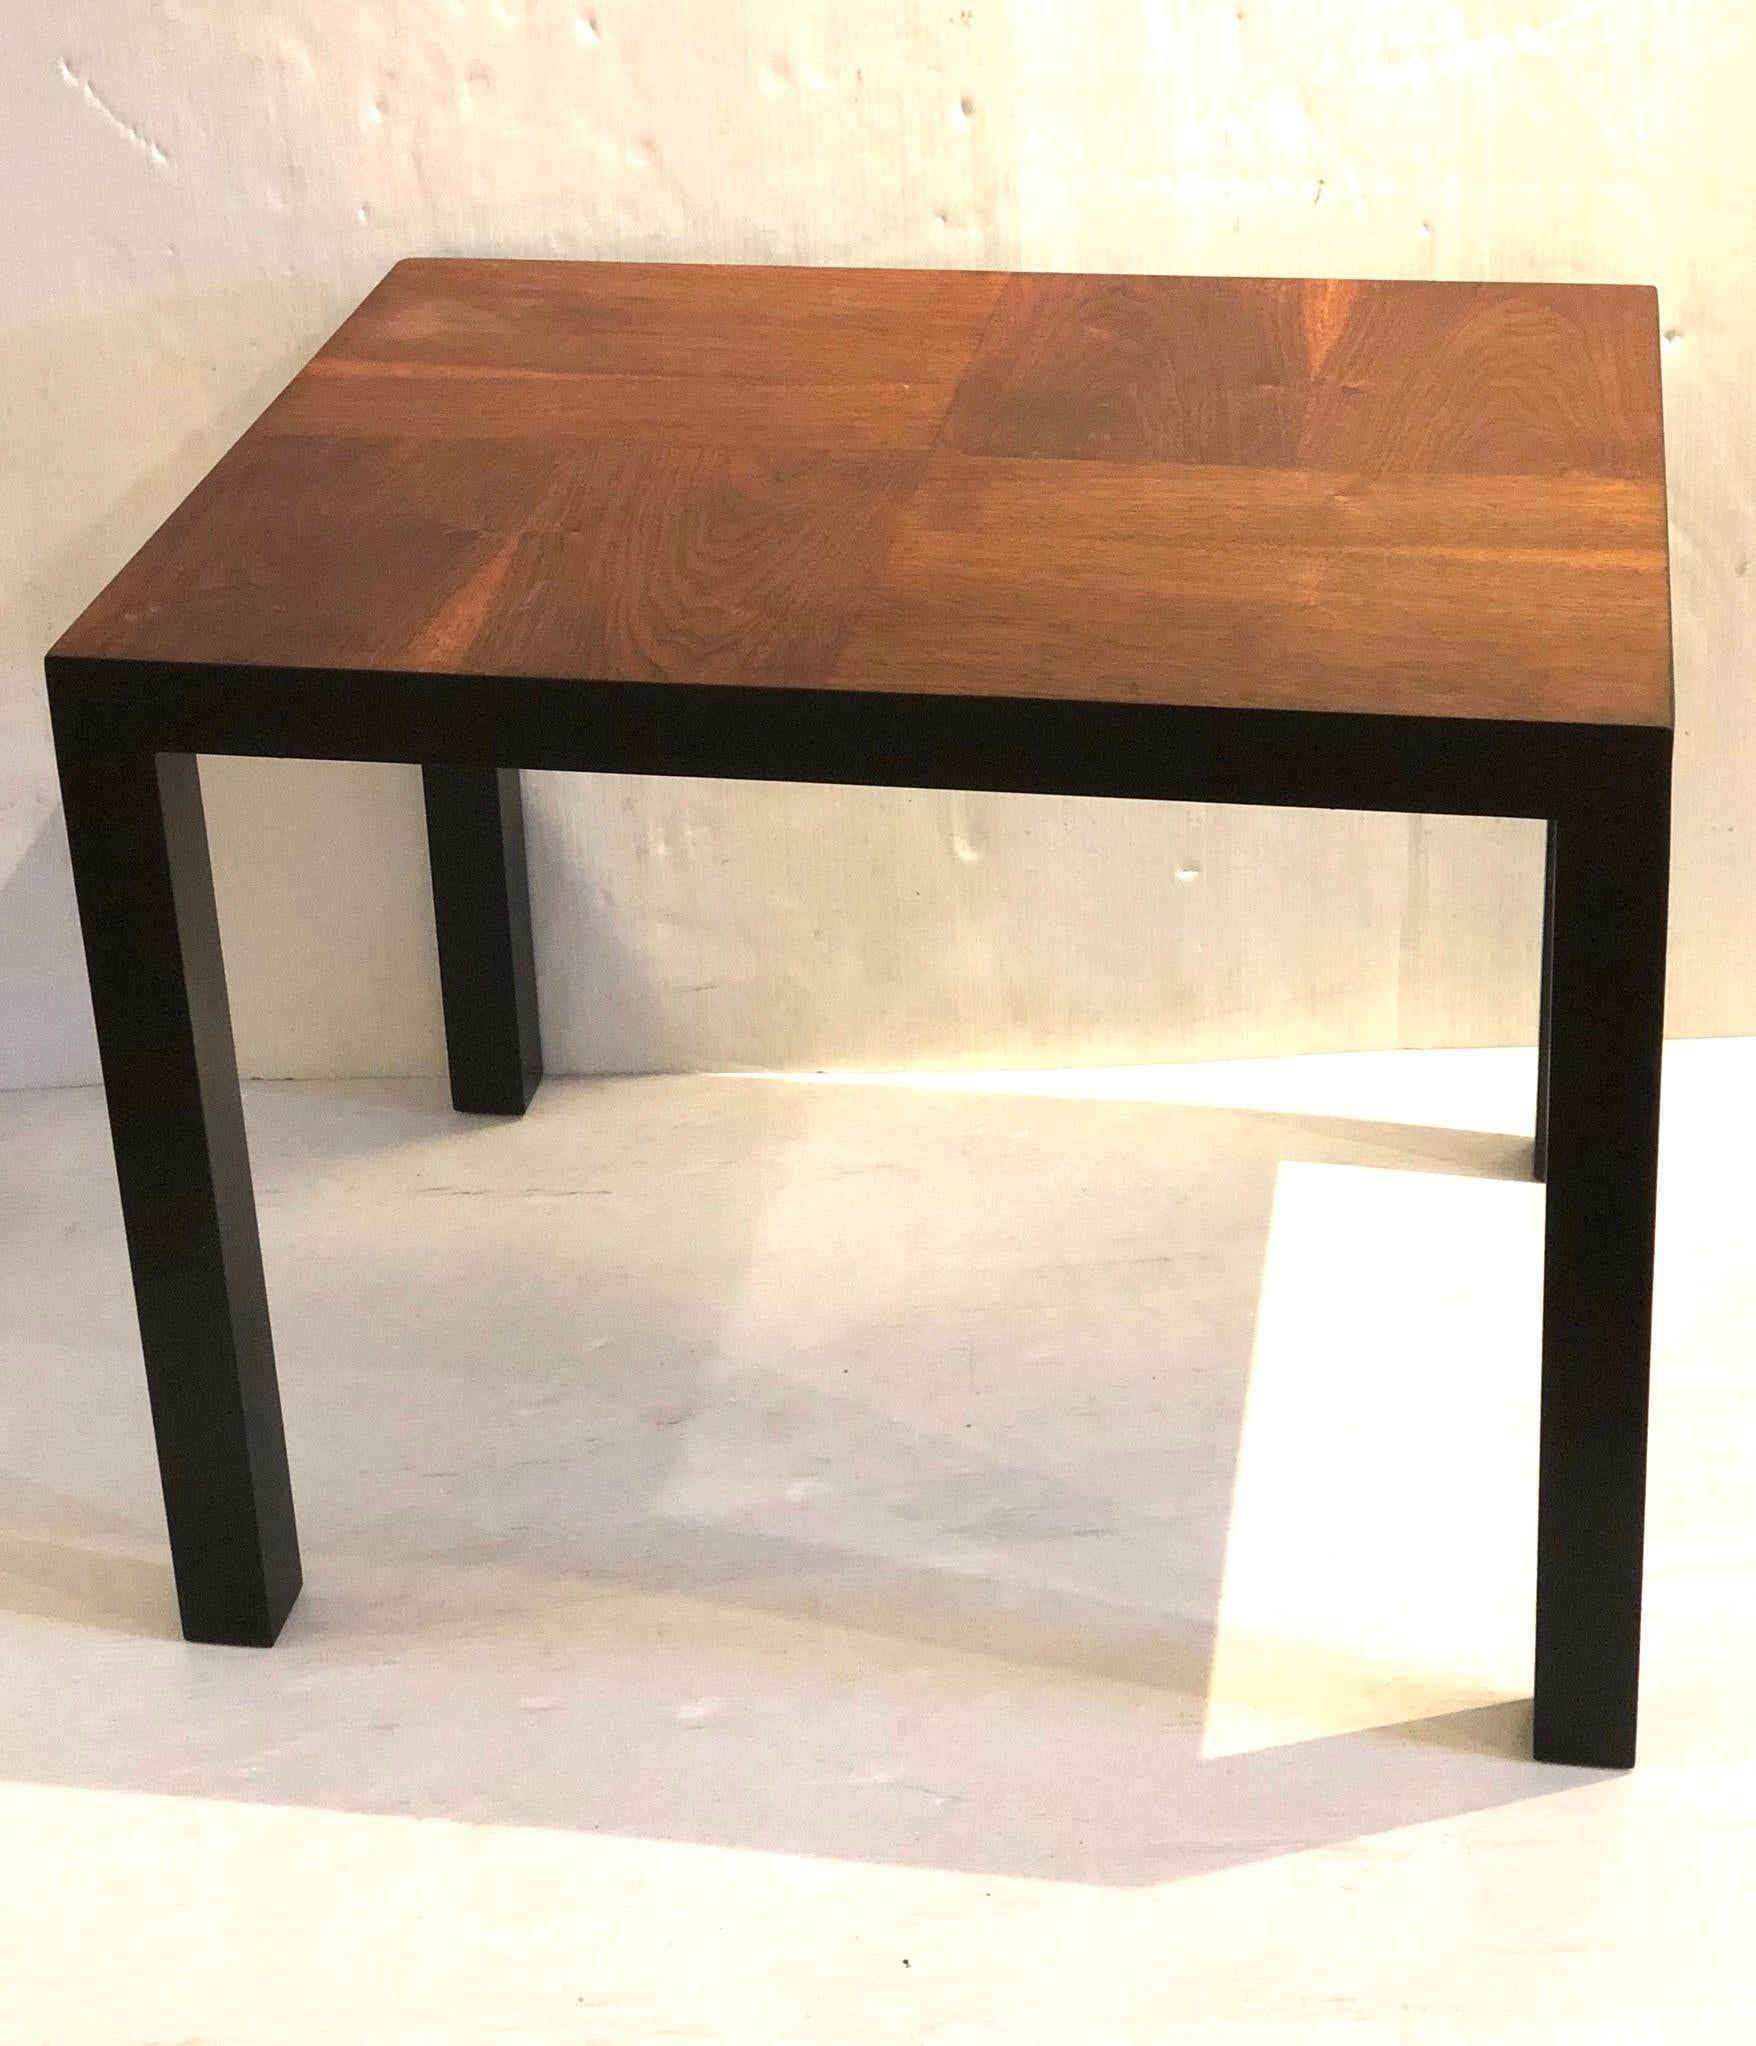 A beautiful unique Mid-Century Modern end cocktail table, freshly refinished the top has a checker board design, the edge and legs have been refinished in black lacquer. simple elegant fits in many decors.